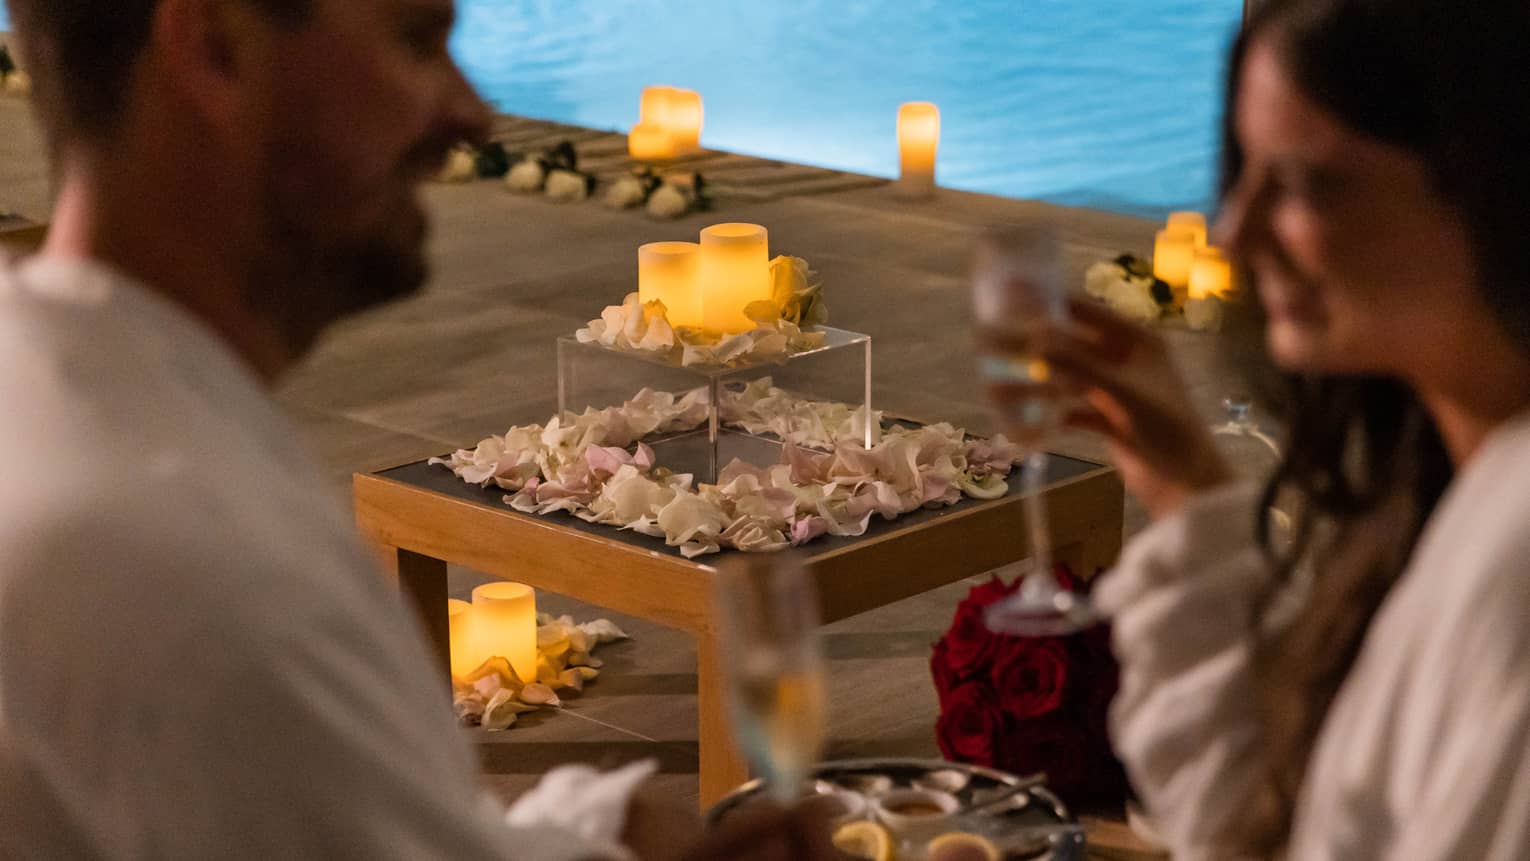 A couple with wine in hand near a pool surrounded by flowers petals and candles.